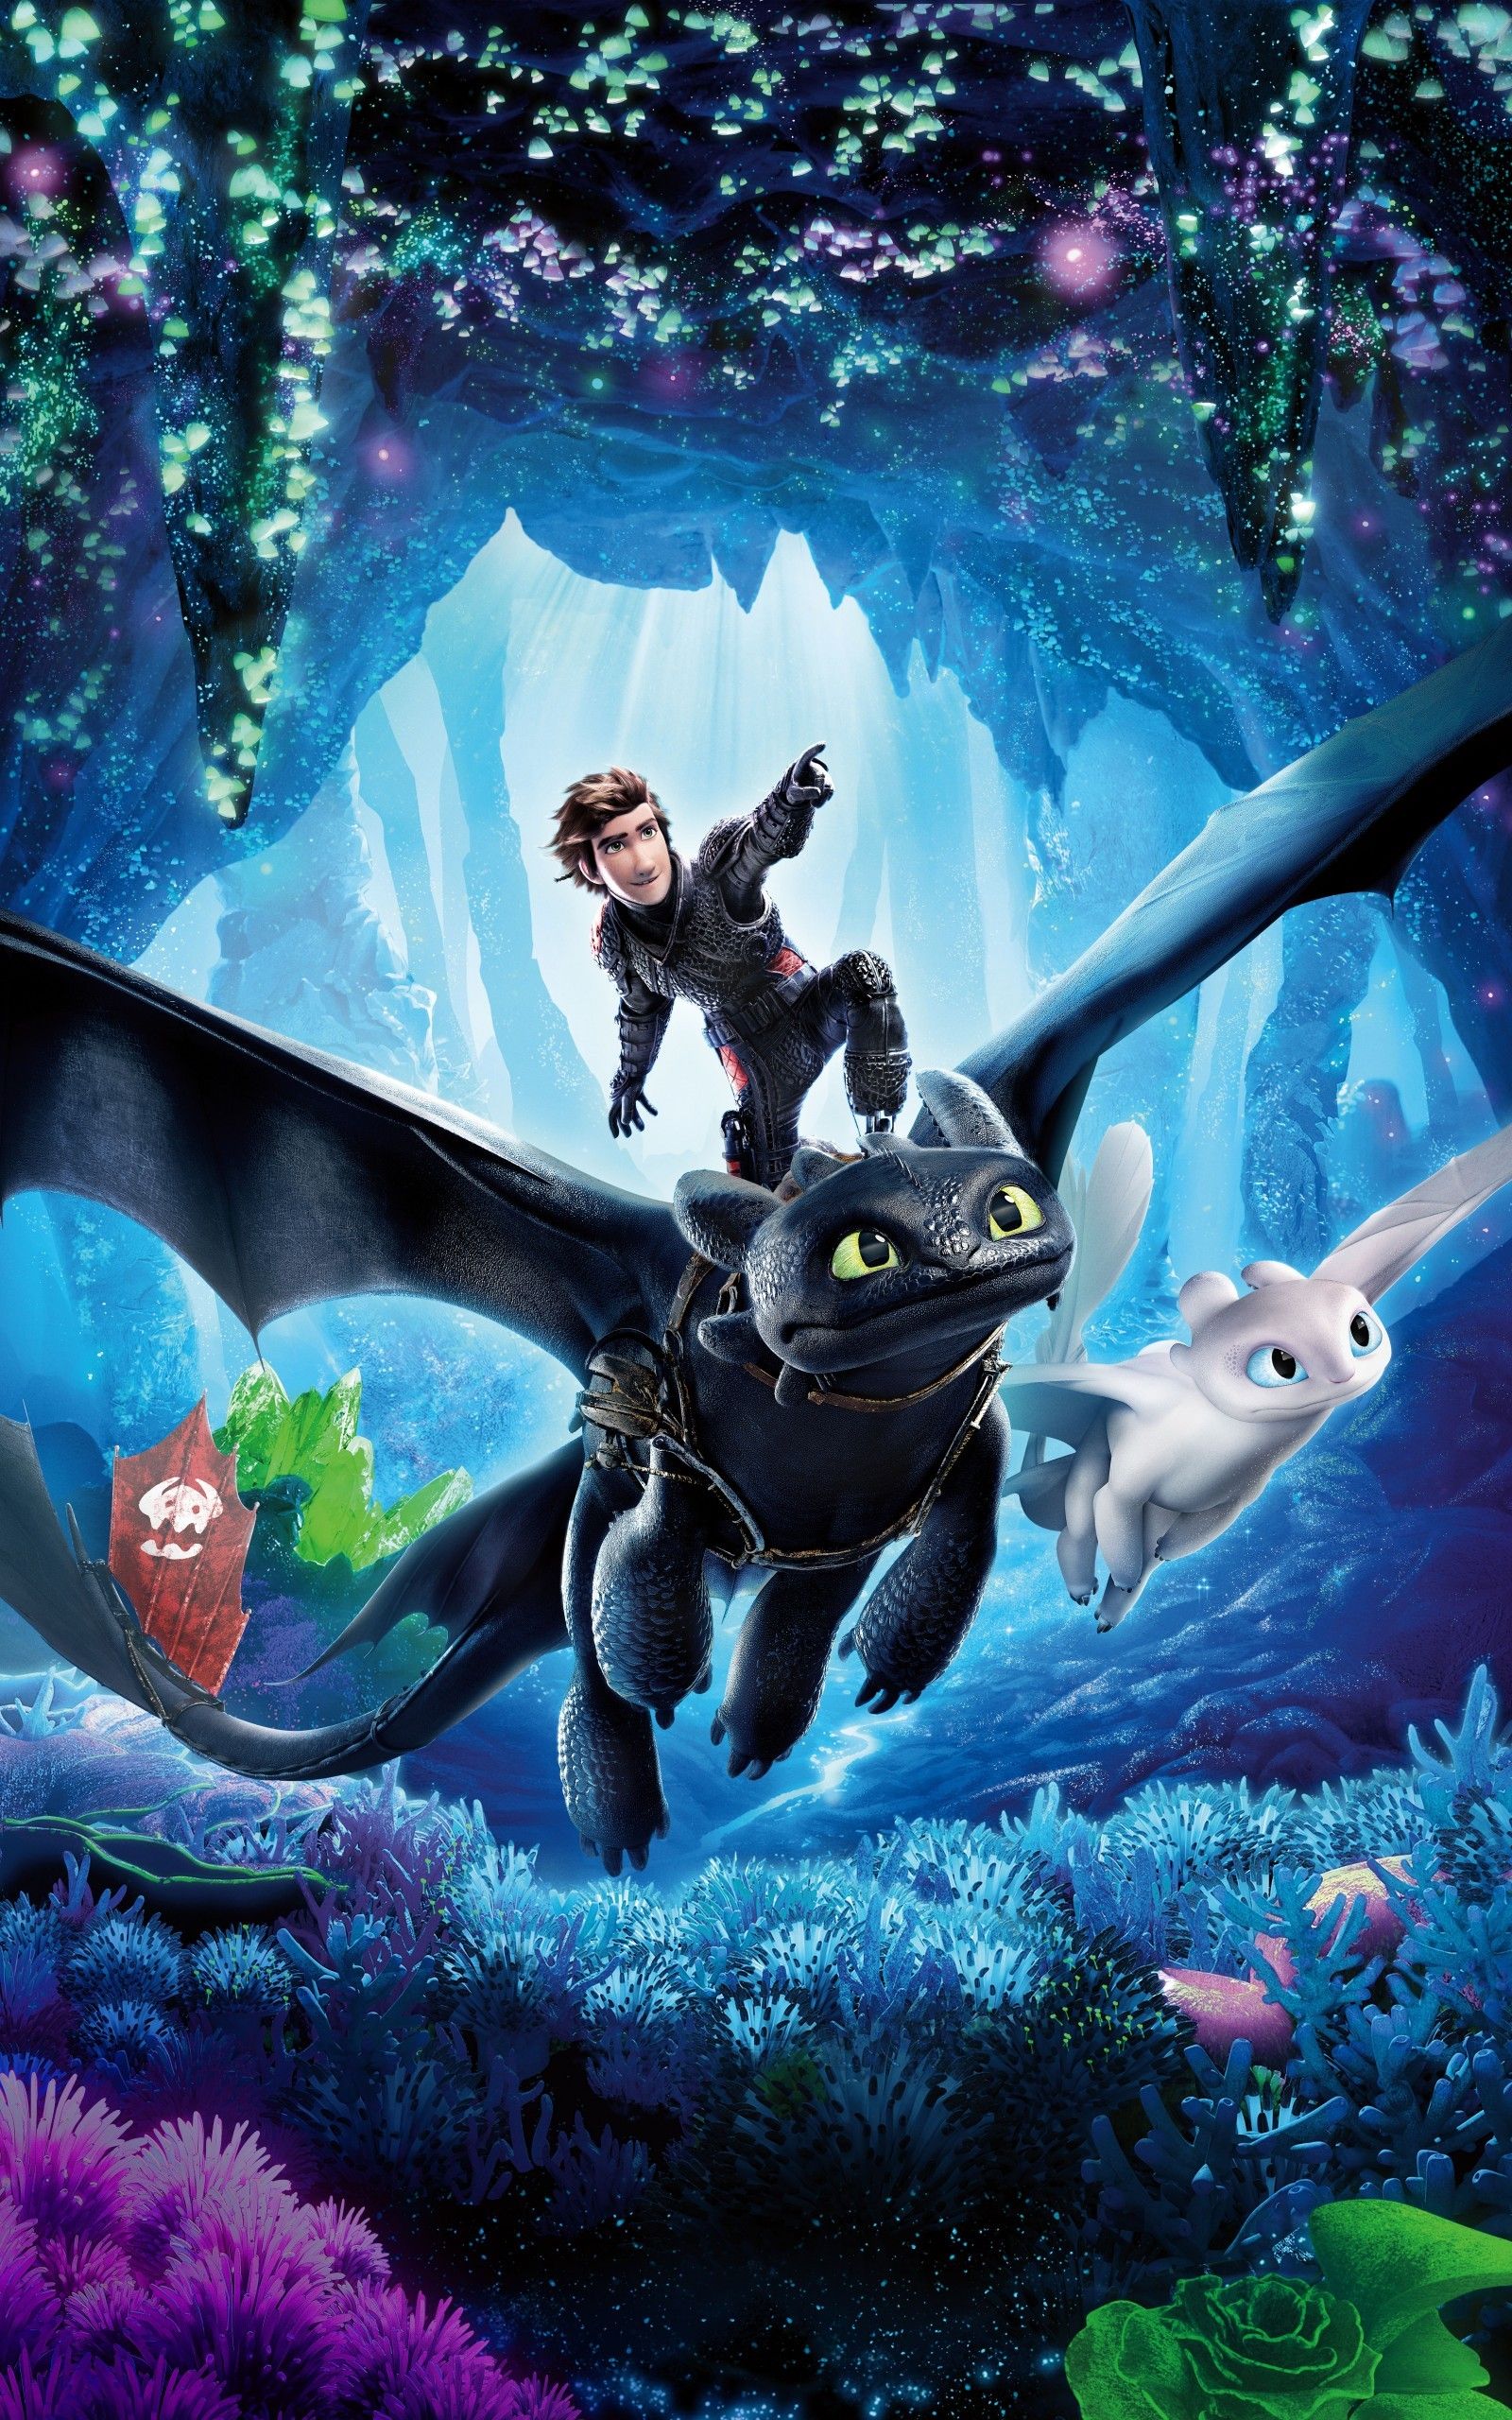 Download 1600x2560 Night Fury, Light Fury, How To Train Your Dragon: The Hidden World, 5k, Toothless, Hiccup, Animation Wallpaper for Google Nexus 10